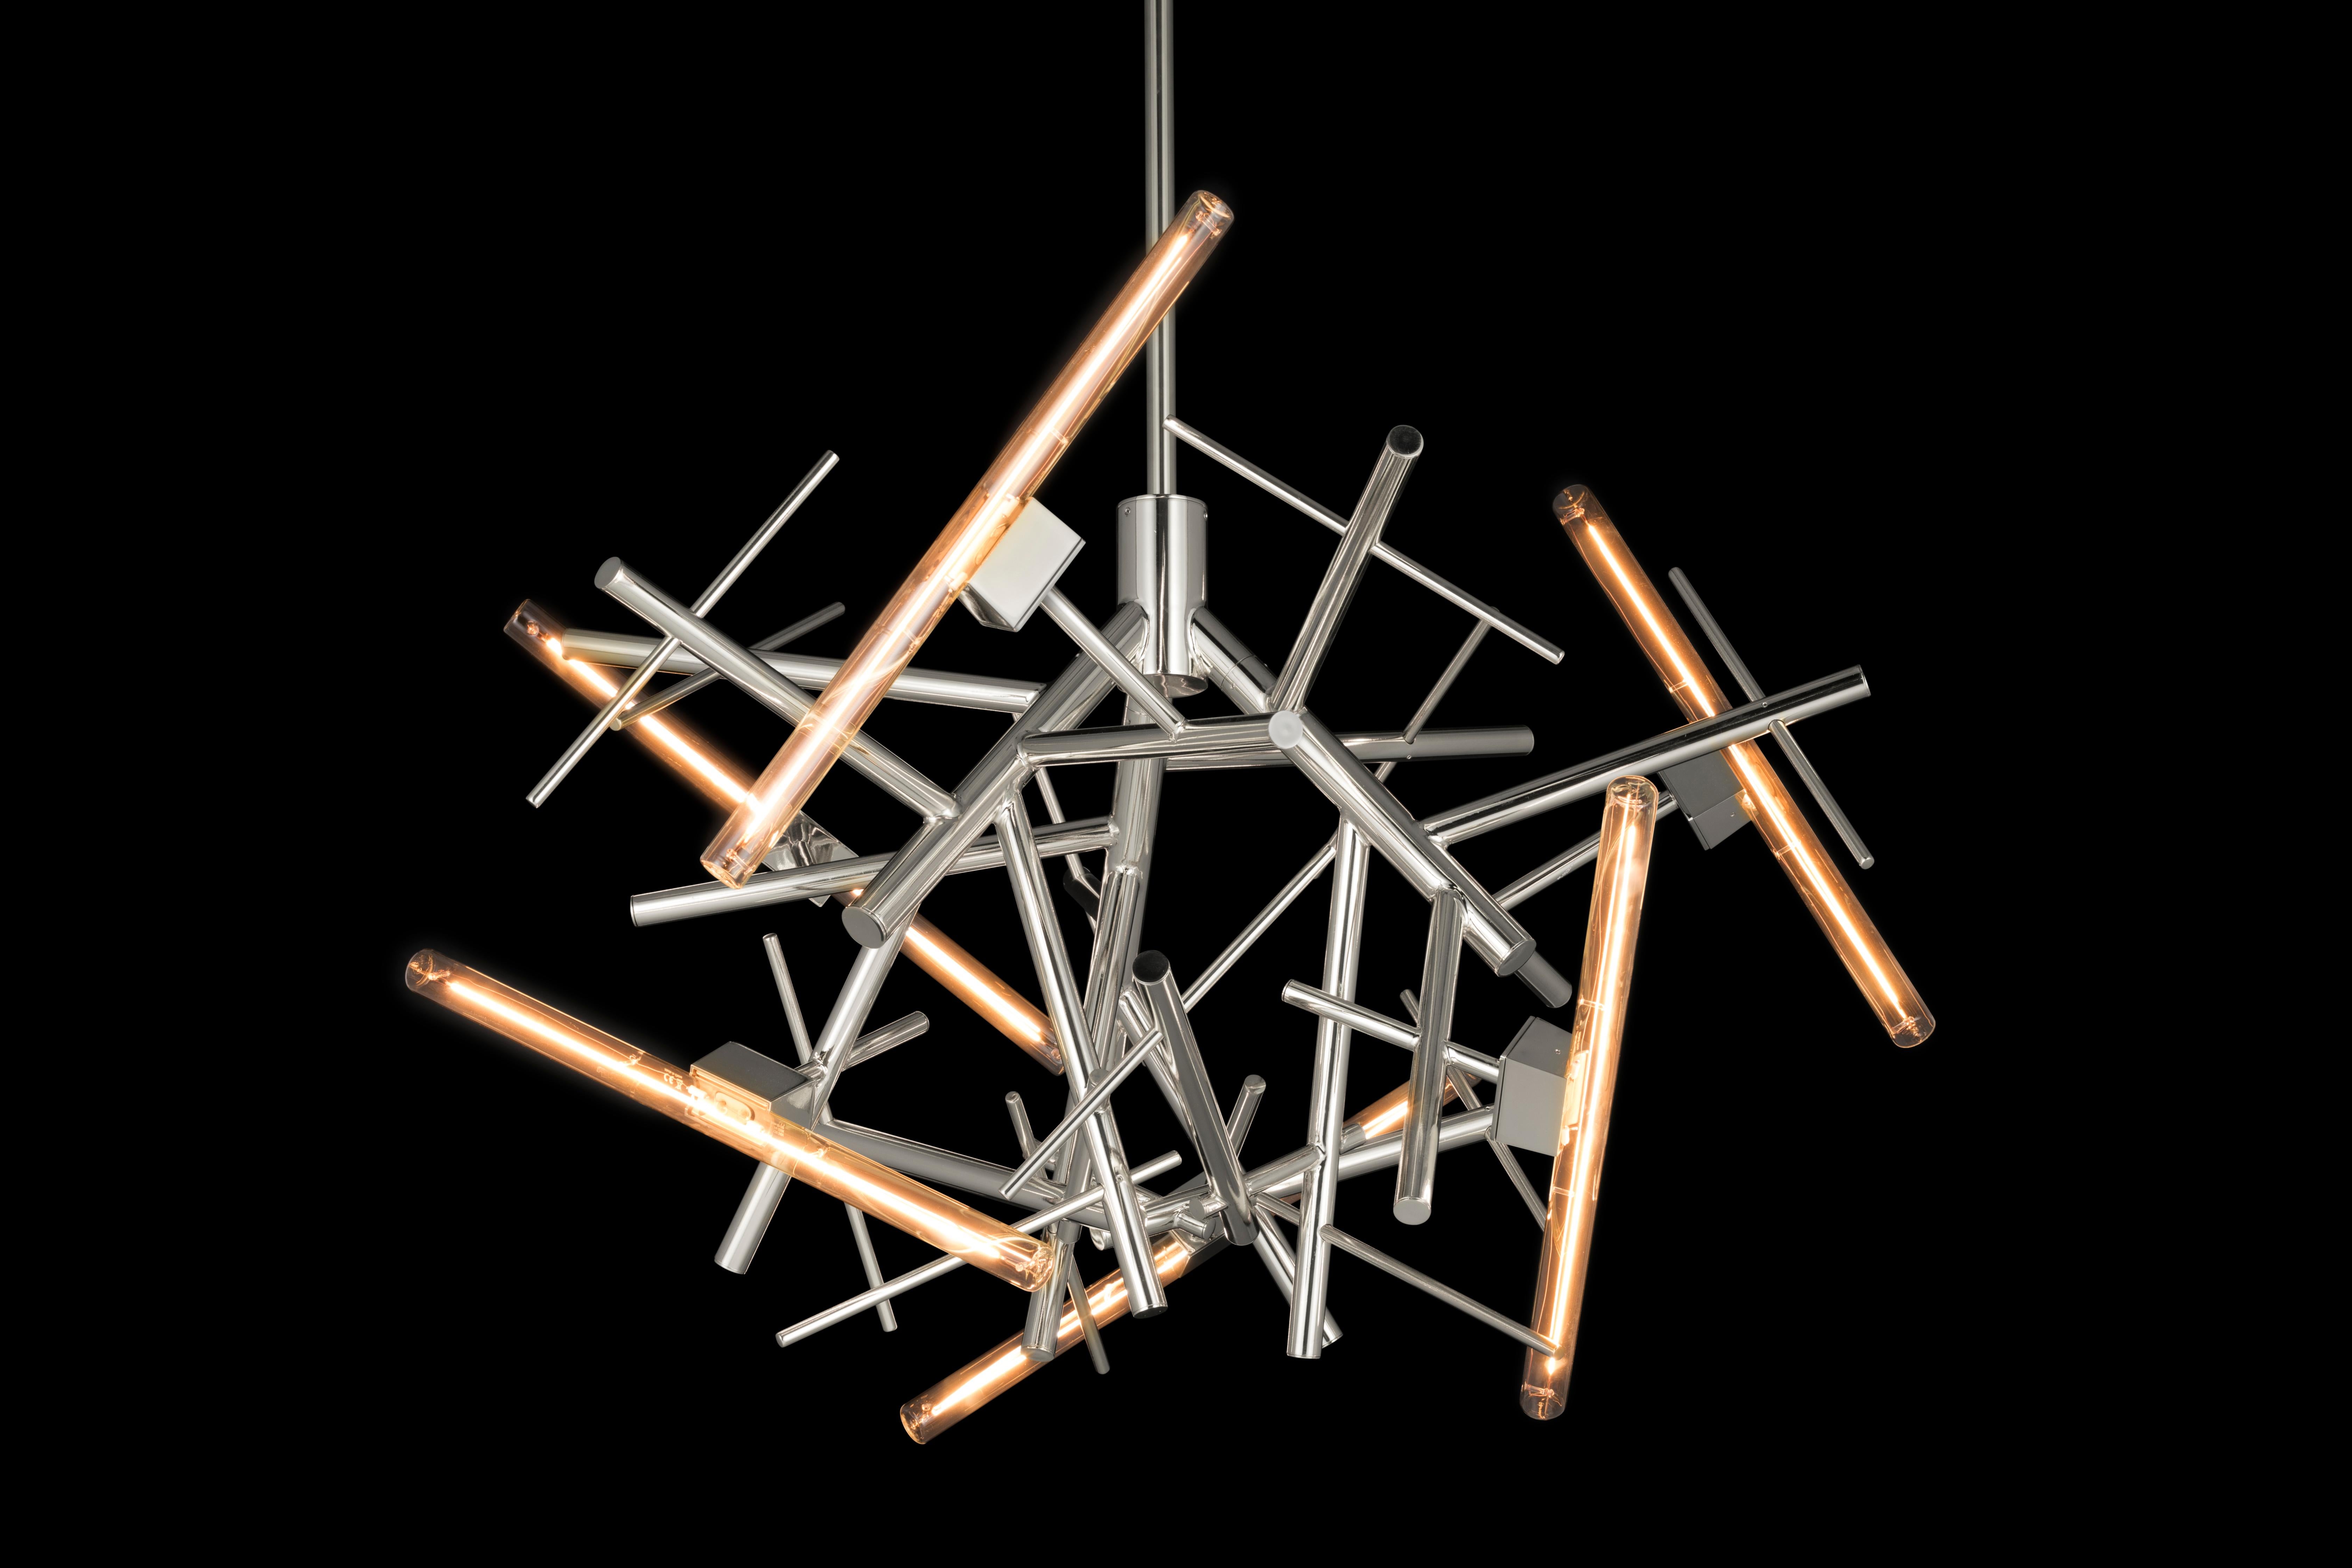 The Linea, a modern chandelier in a nickel finish, is designed by William Brand, founder of Brand van Egmond. Evocative as surprising, the chandelier is available in four sizes in the finishes black matt, nickel, brass, brass burnished, and nickel